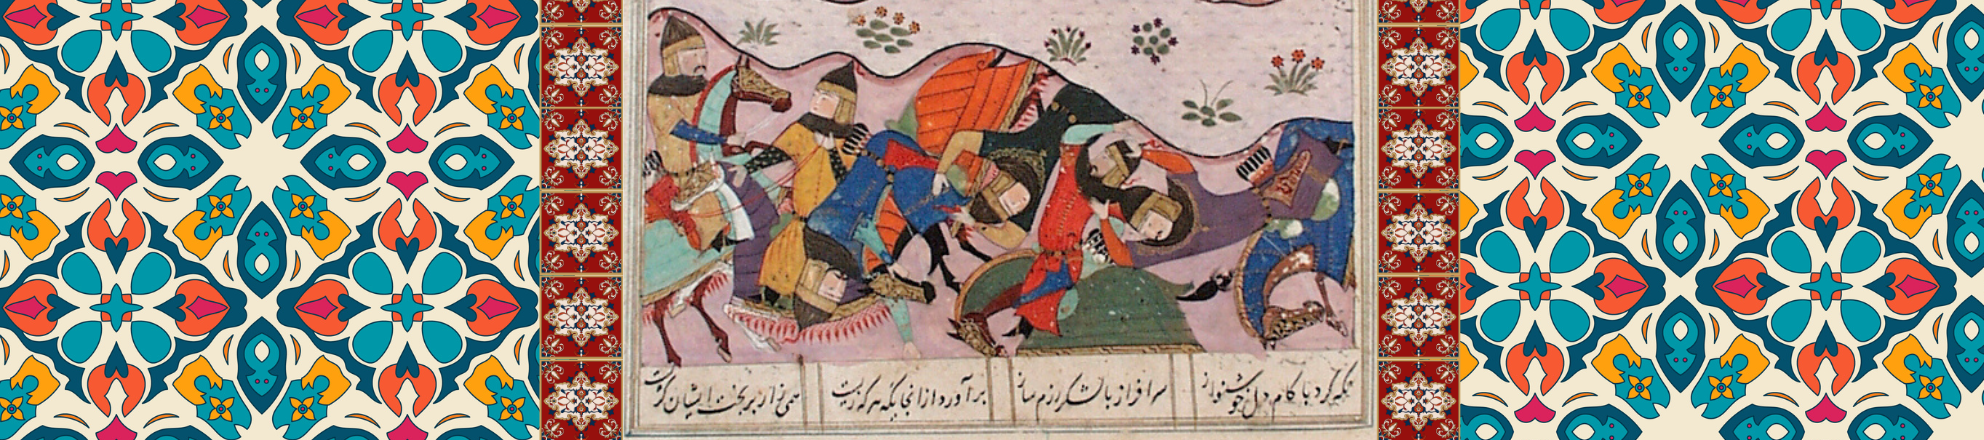 the-discomfiture-and-death-of-piroz-from-a-manuscript-of-the-shahnama-book-